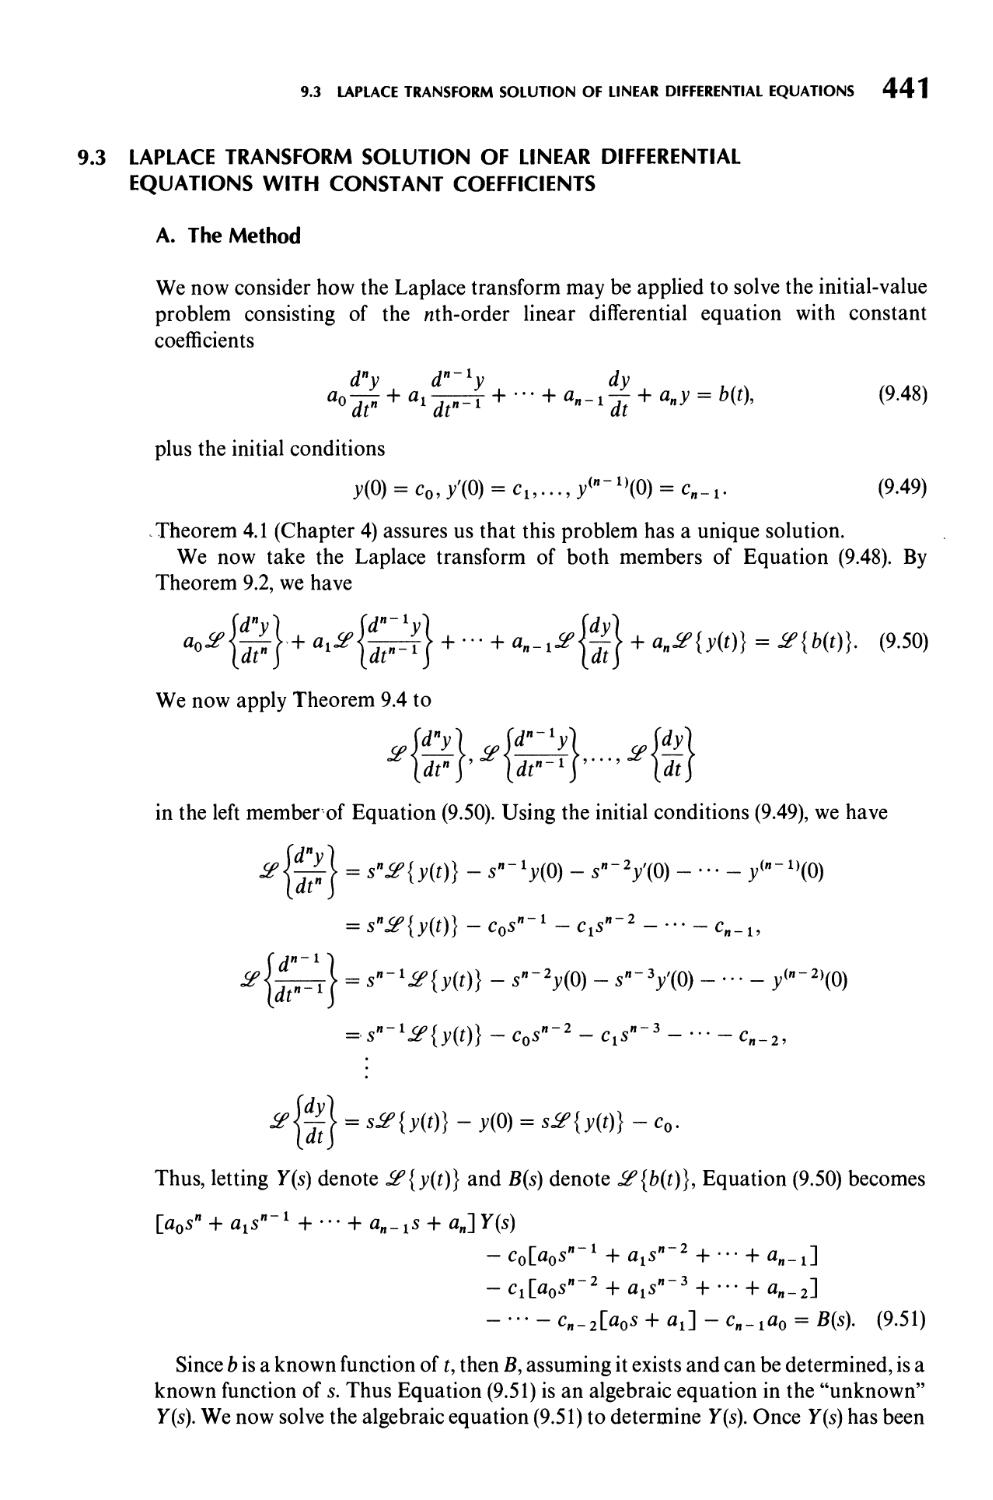 9.3  Laplace Transform Solution of Linear Differential Equations with Constant Coefficients